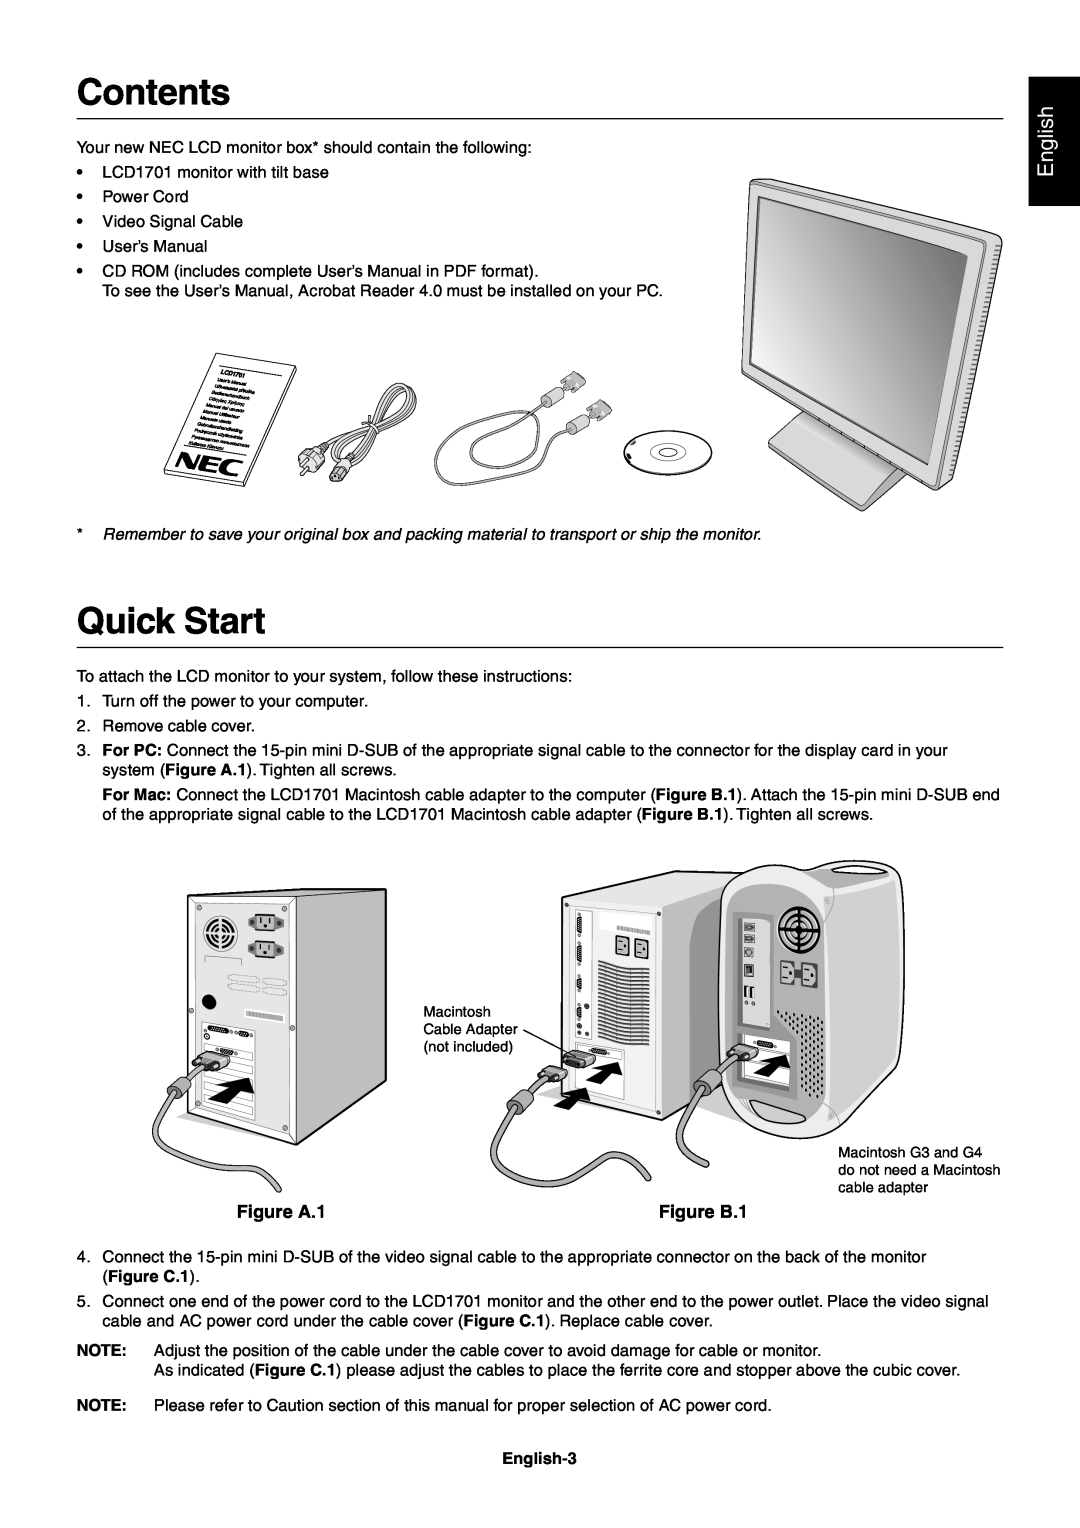 NEC LCD1701 user manual Contents, Quick Start, Figure A.1, Figure B.1, English 